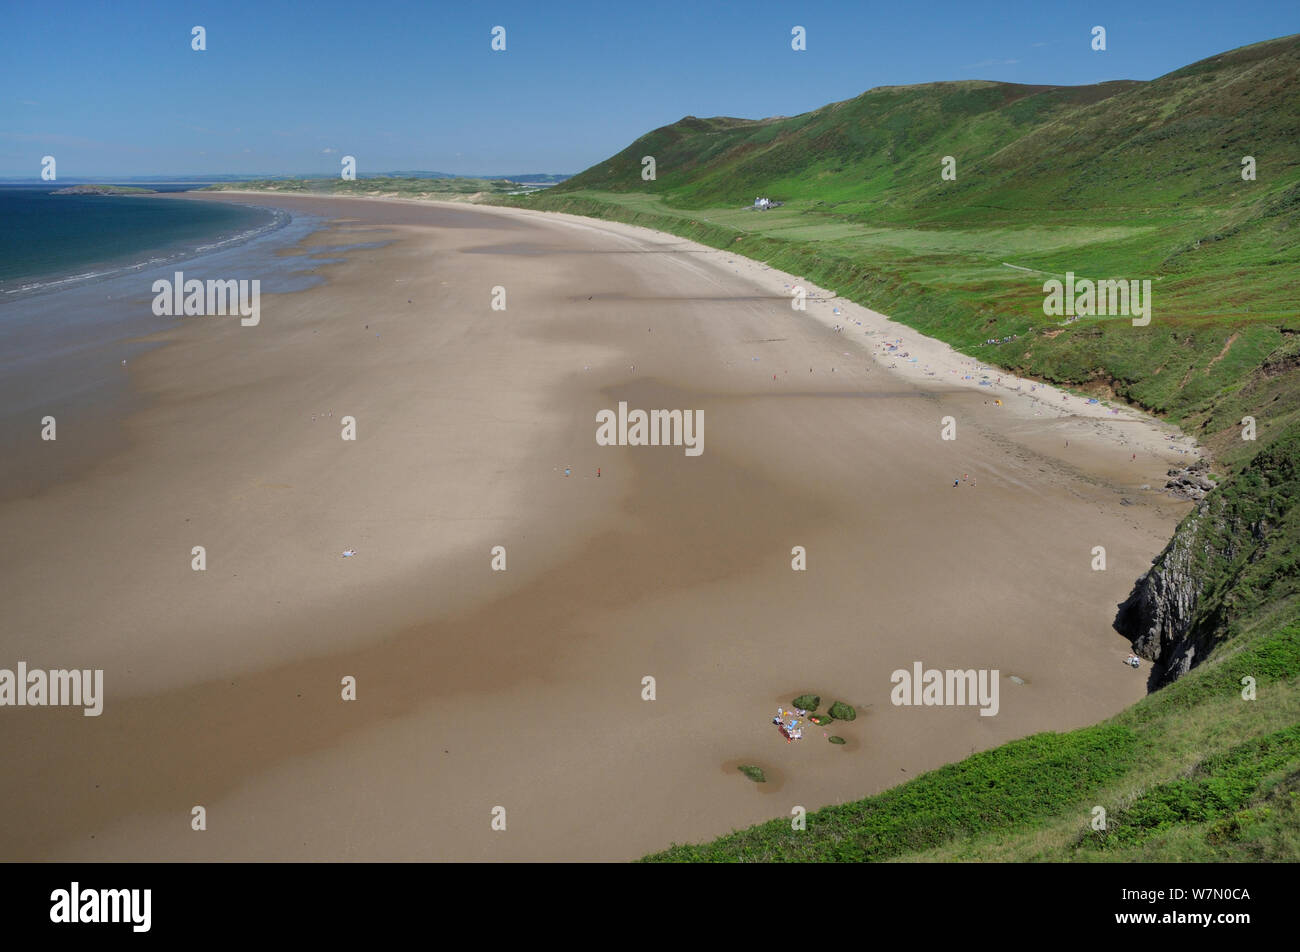 Overview of Rhossili Bay at low tide with many people relaxing on the huge sandy beach below Rhossili Down, The Gower peninsula, Wales, UK, July. Sequence 1 of 2, matching view with different tides Stock Photo